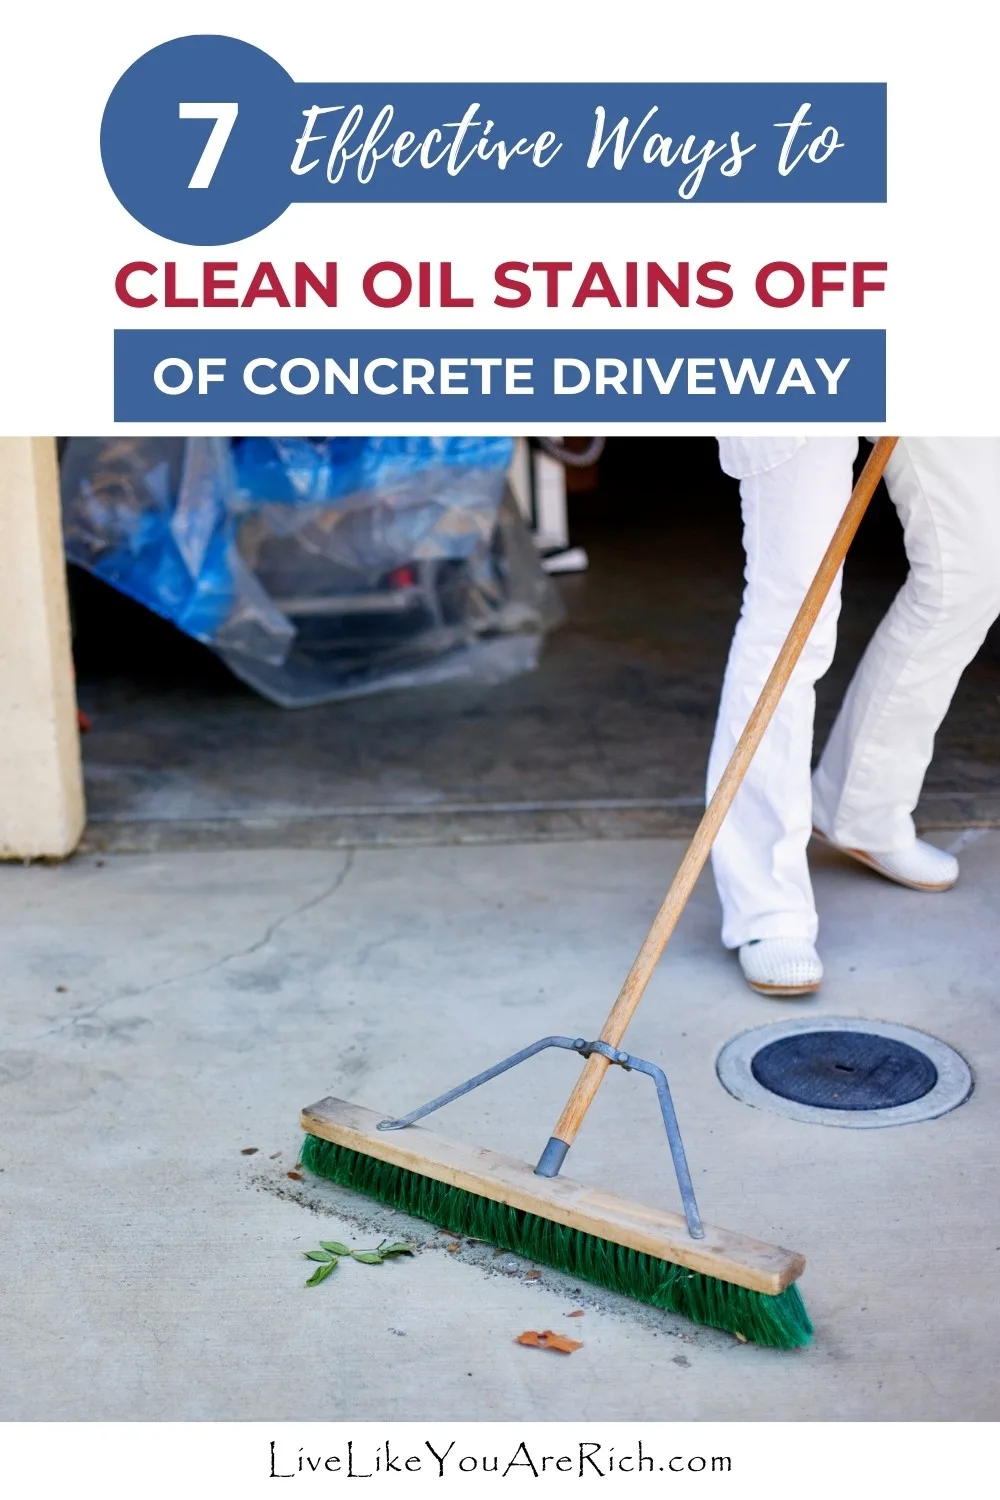 Oil stains on concrete driveways are not just unsightly - they can get tracked into your house or in your car. Removing oil stains from your concrete driveway is not just wiping a food spill on your kitchen. To effectively clean oil stains you need to adjust your ways and use greater force in combination with chemicals.